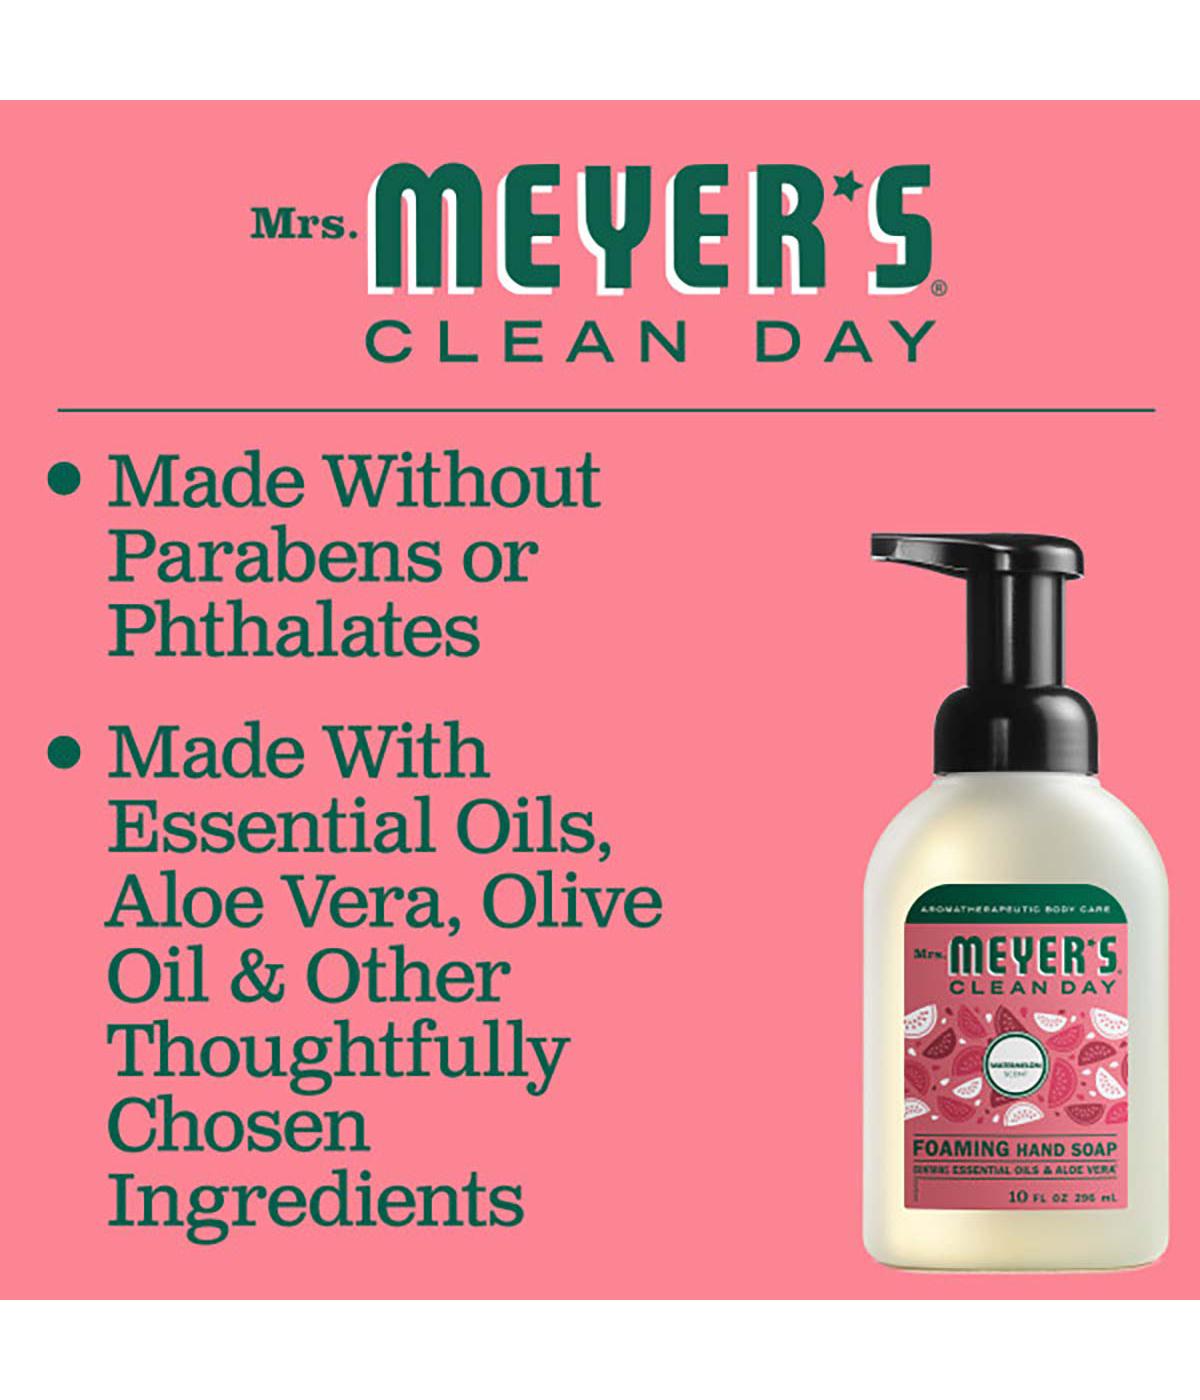 Mrs. Meyer's Clean Day Watermelon Foaming Hand Soap; image 2 of 6